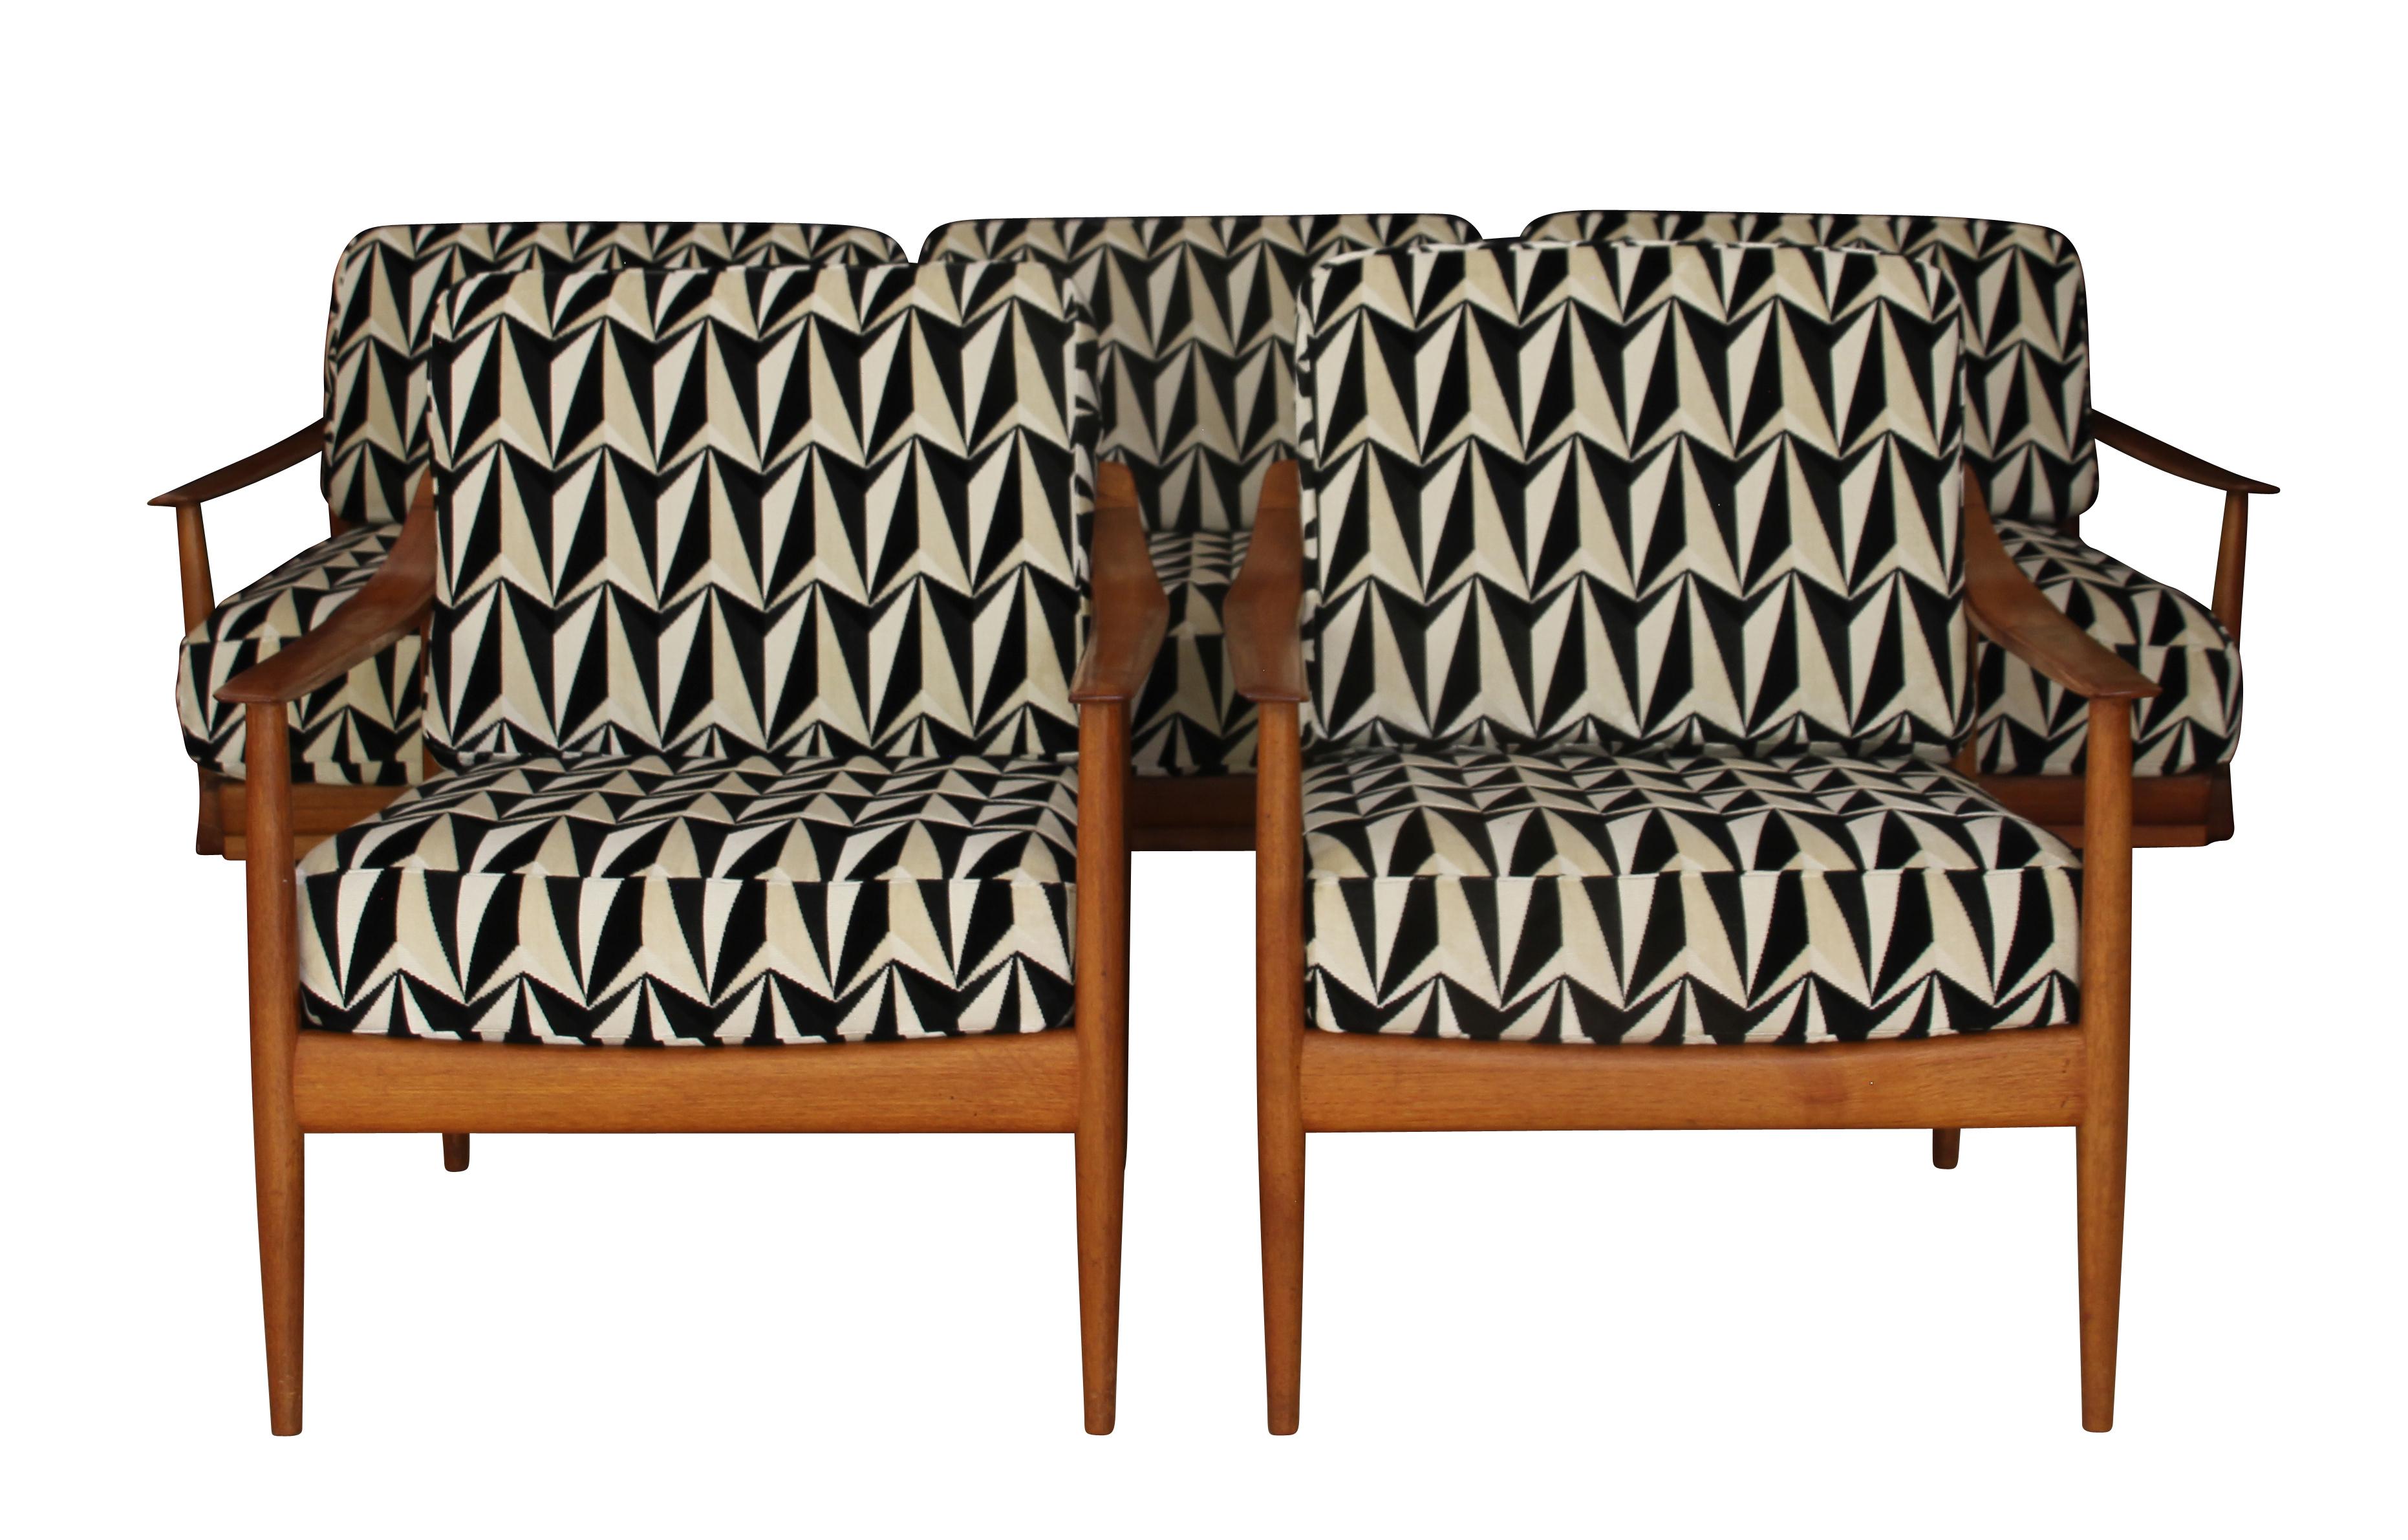 Mid-Century seating group by Knoll, teak wood, Reupholstery, Germany, 1950s

Wonderful eye-catching Mid-Century Modern seating Group by Walter Knoll. 

The group consists of two armchairs and one bench/sofa. Being built in the 1950s in Germany, this